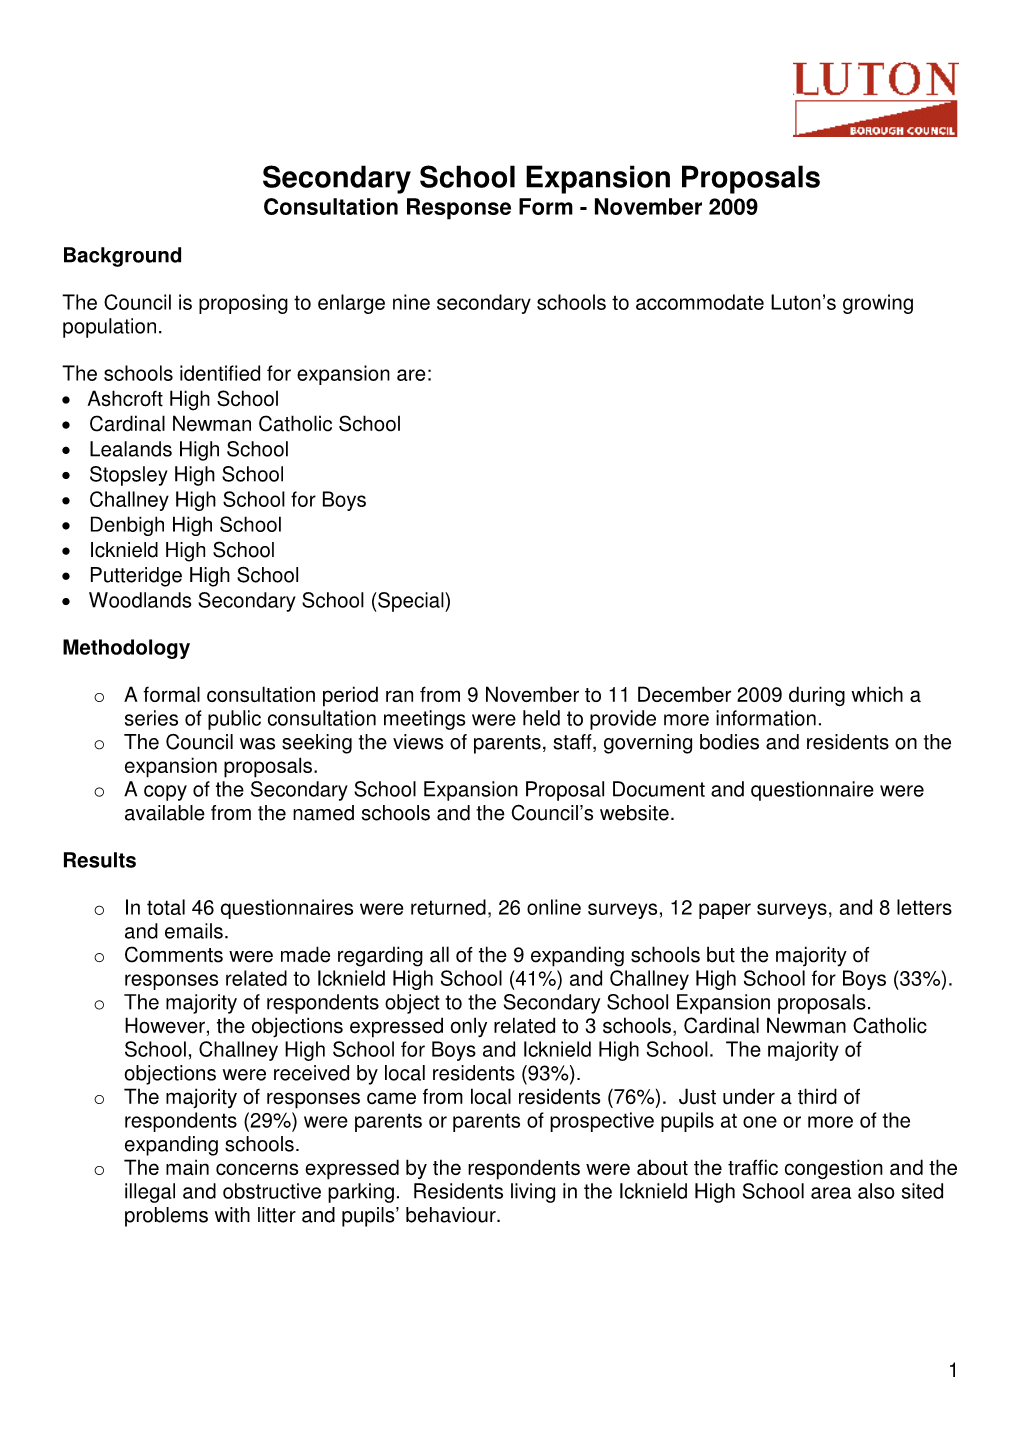 Secondary School Expansion Proposals Consultation Response Form - November 2009